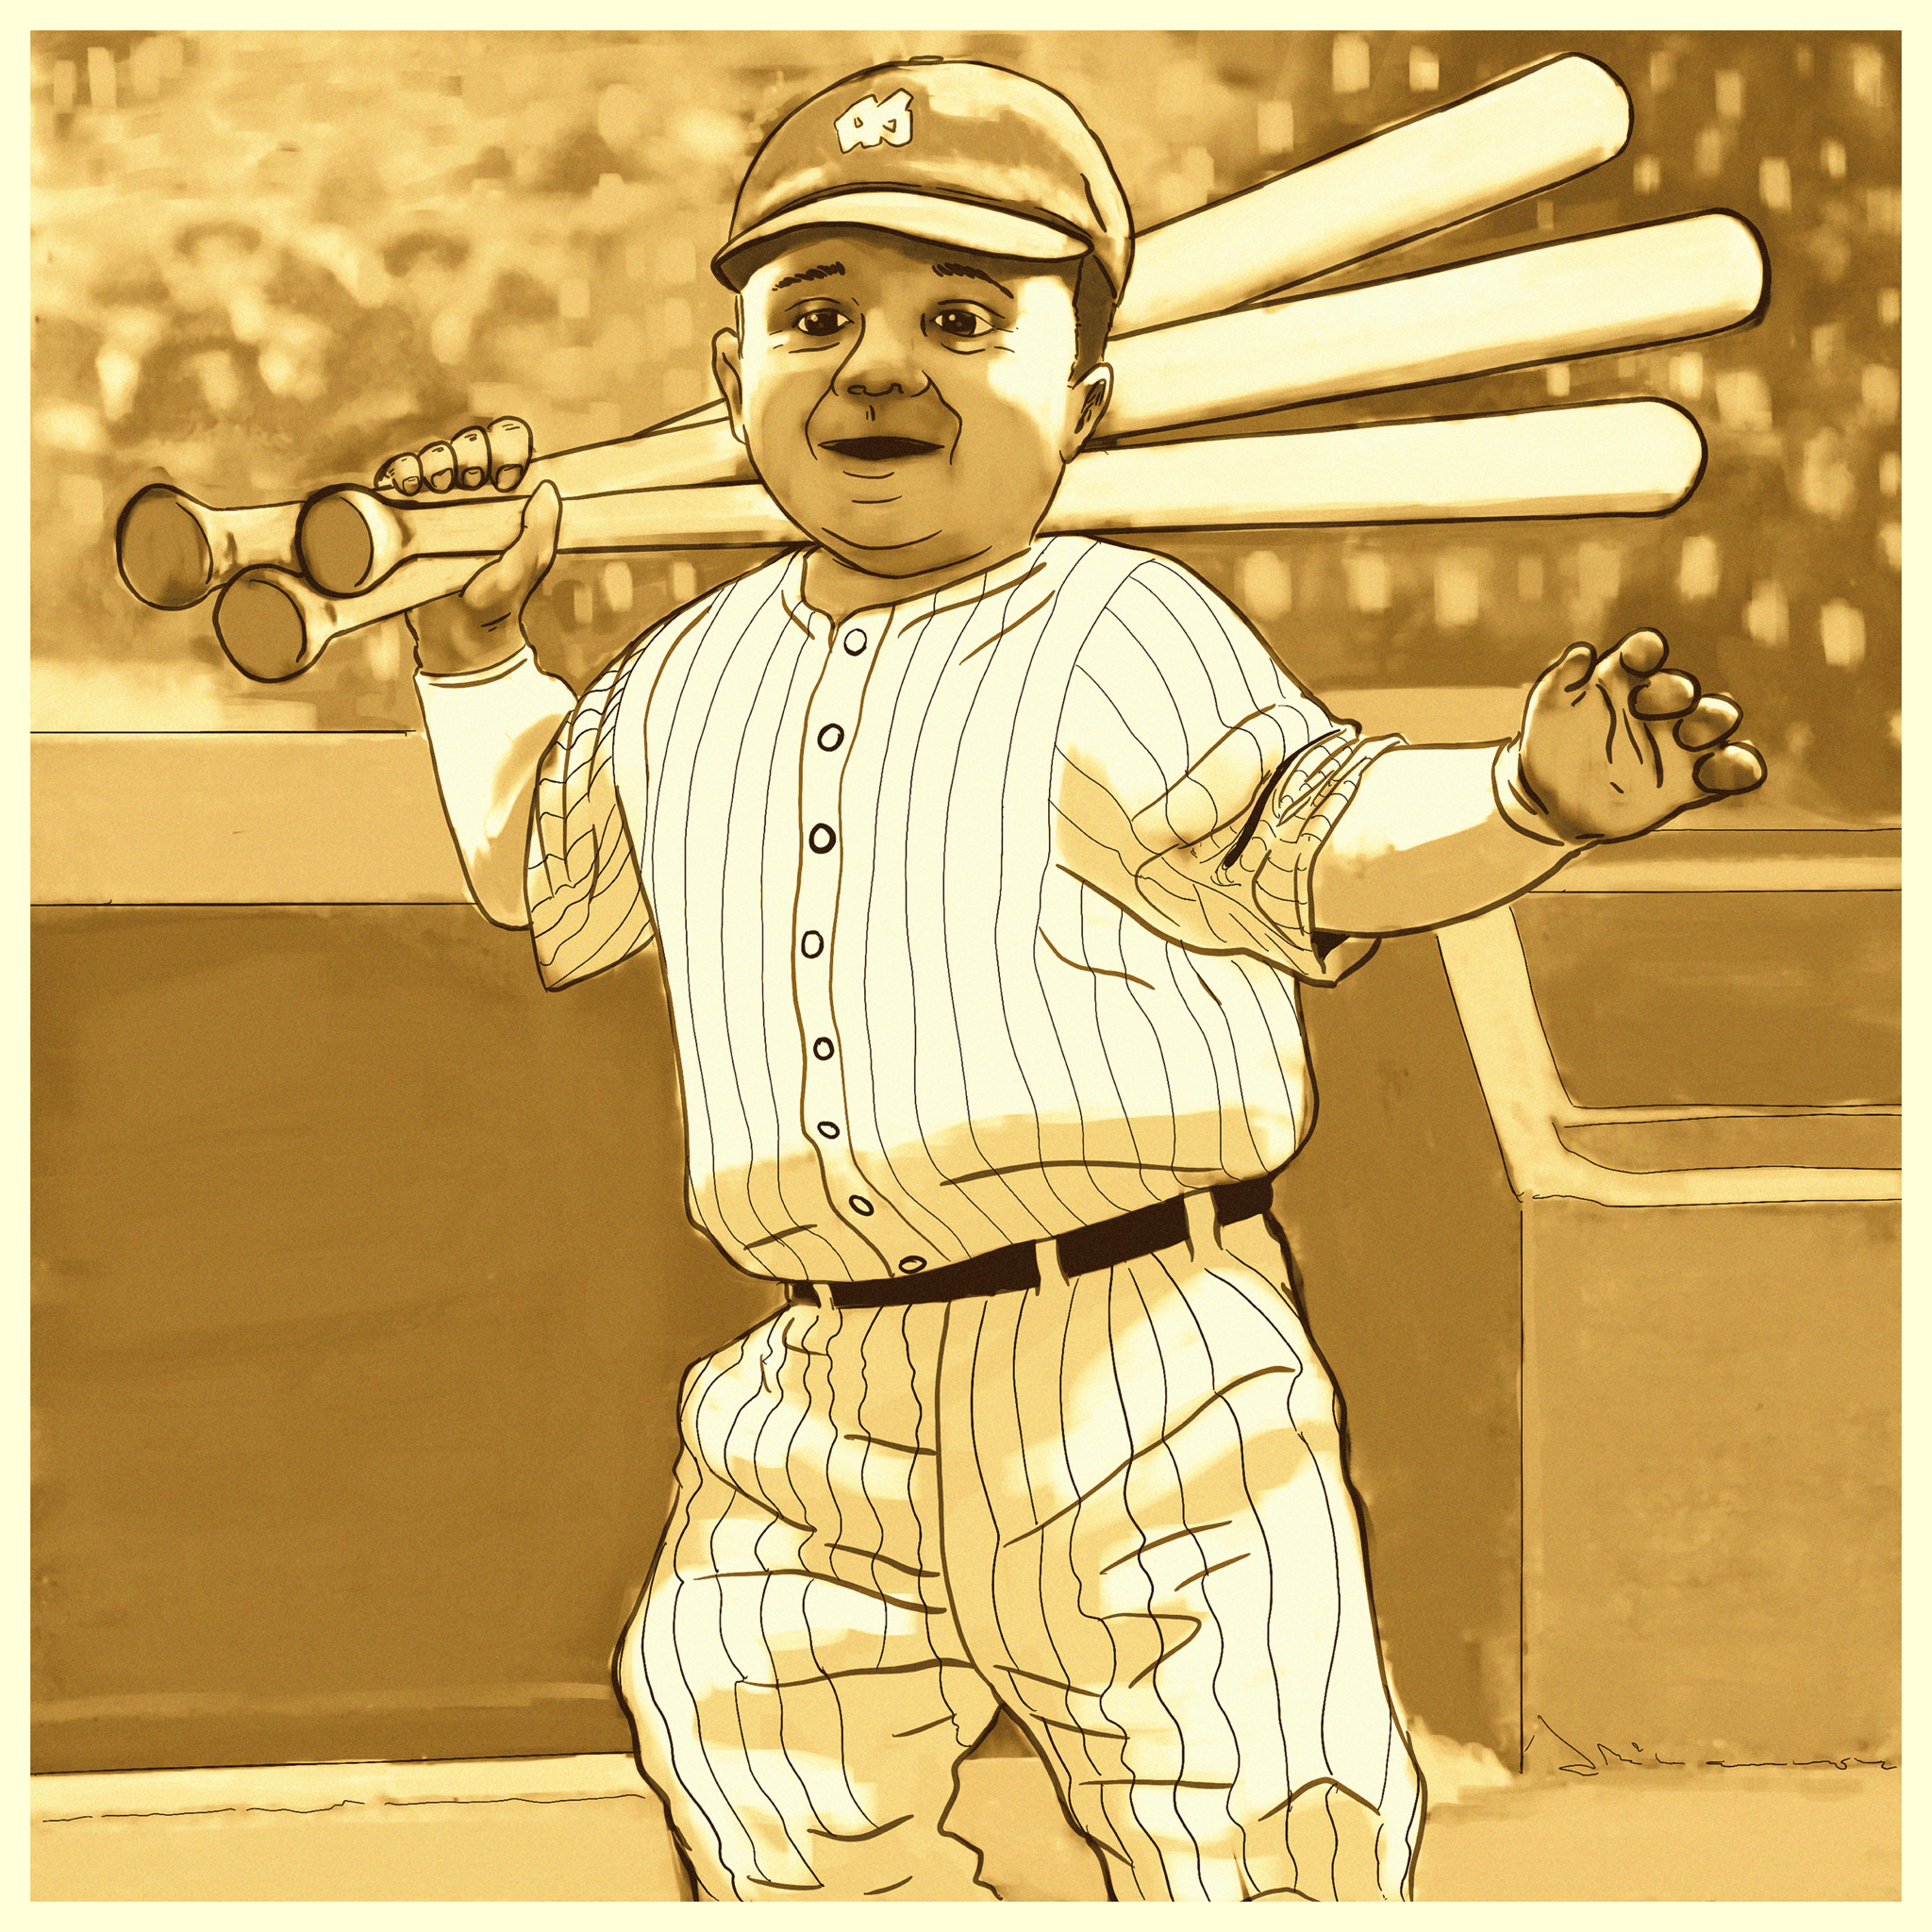 "BAMBINO" Moonlight Edition: (The "100 Legends" Tribute to Babe Ruth) - “Three Bats”